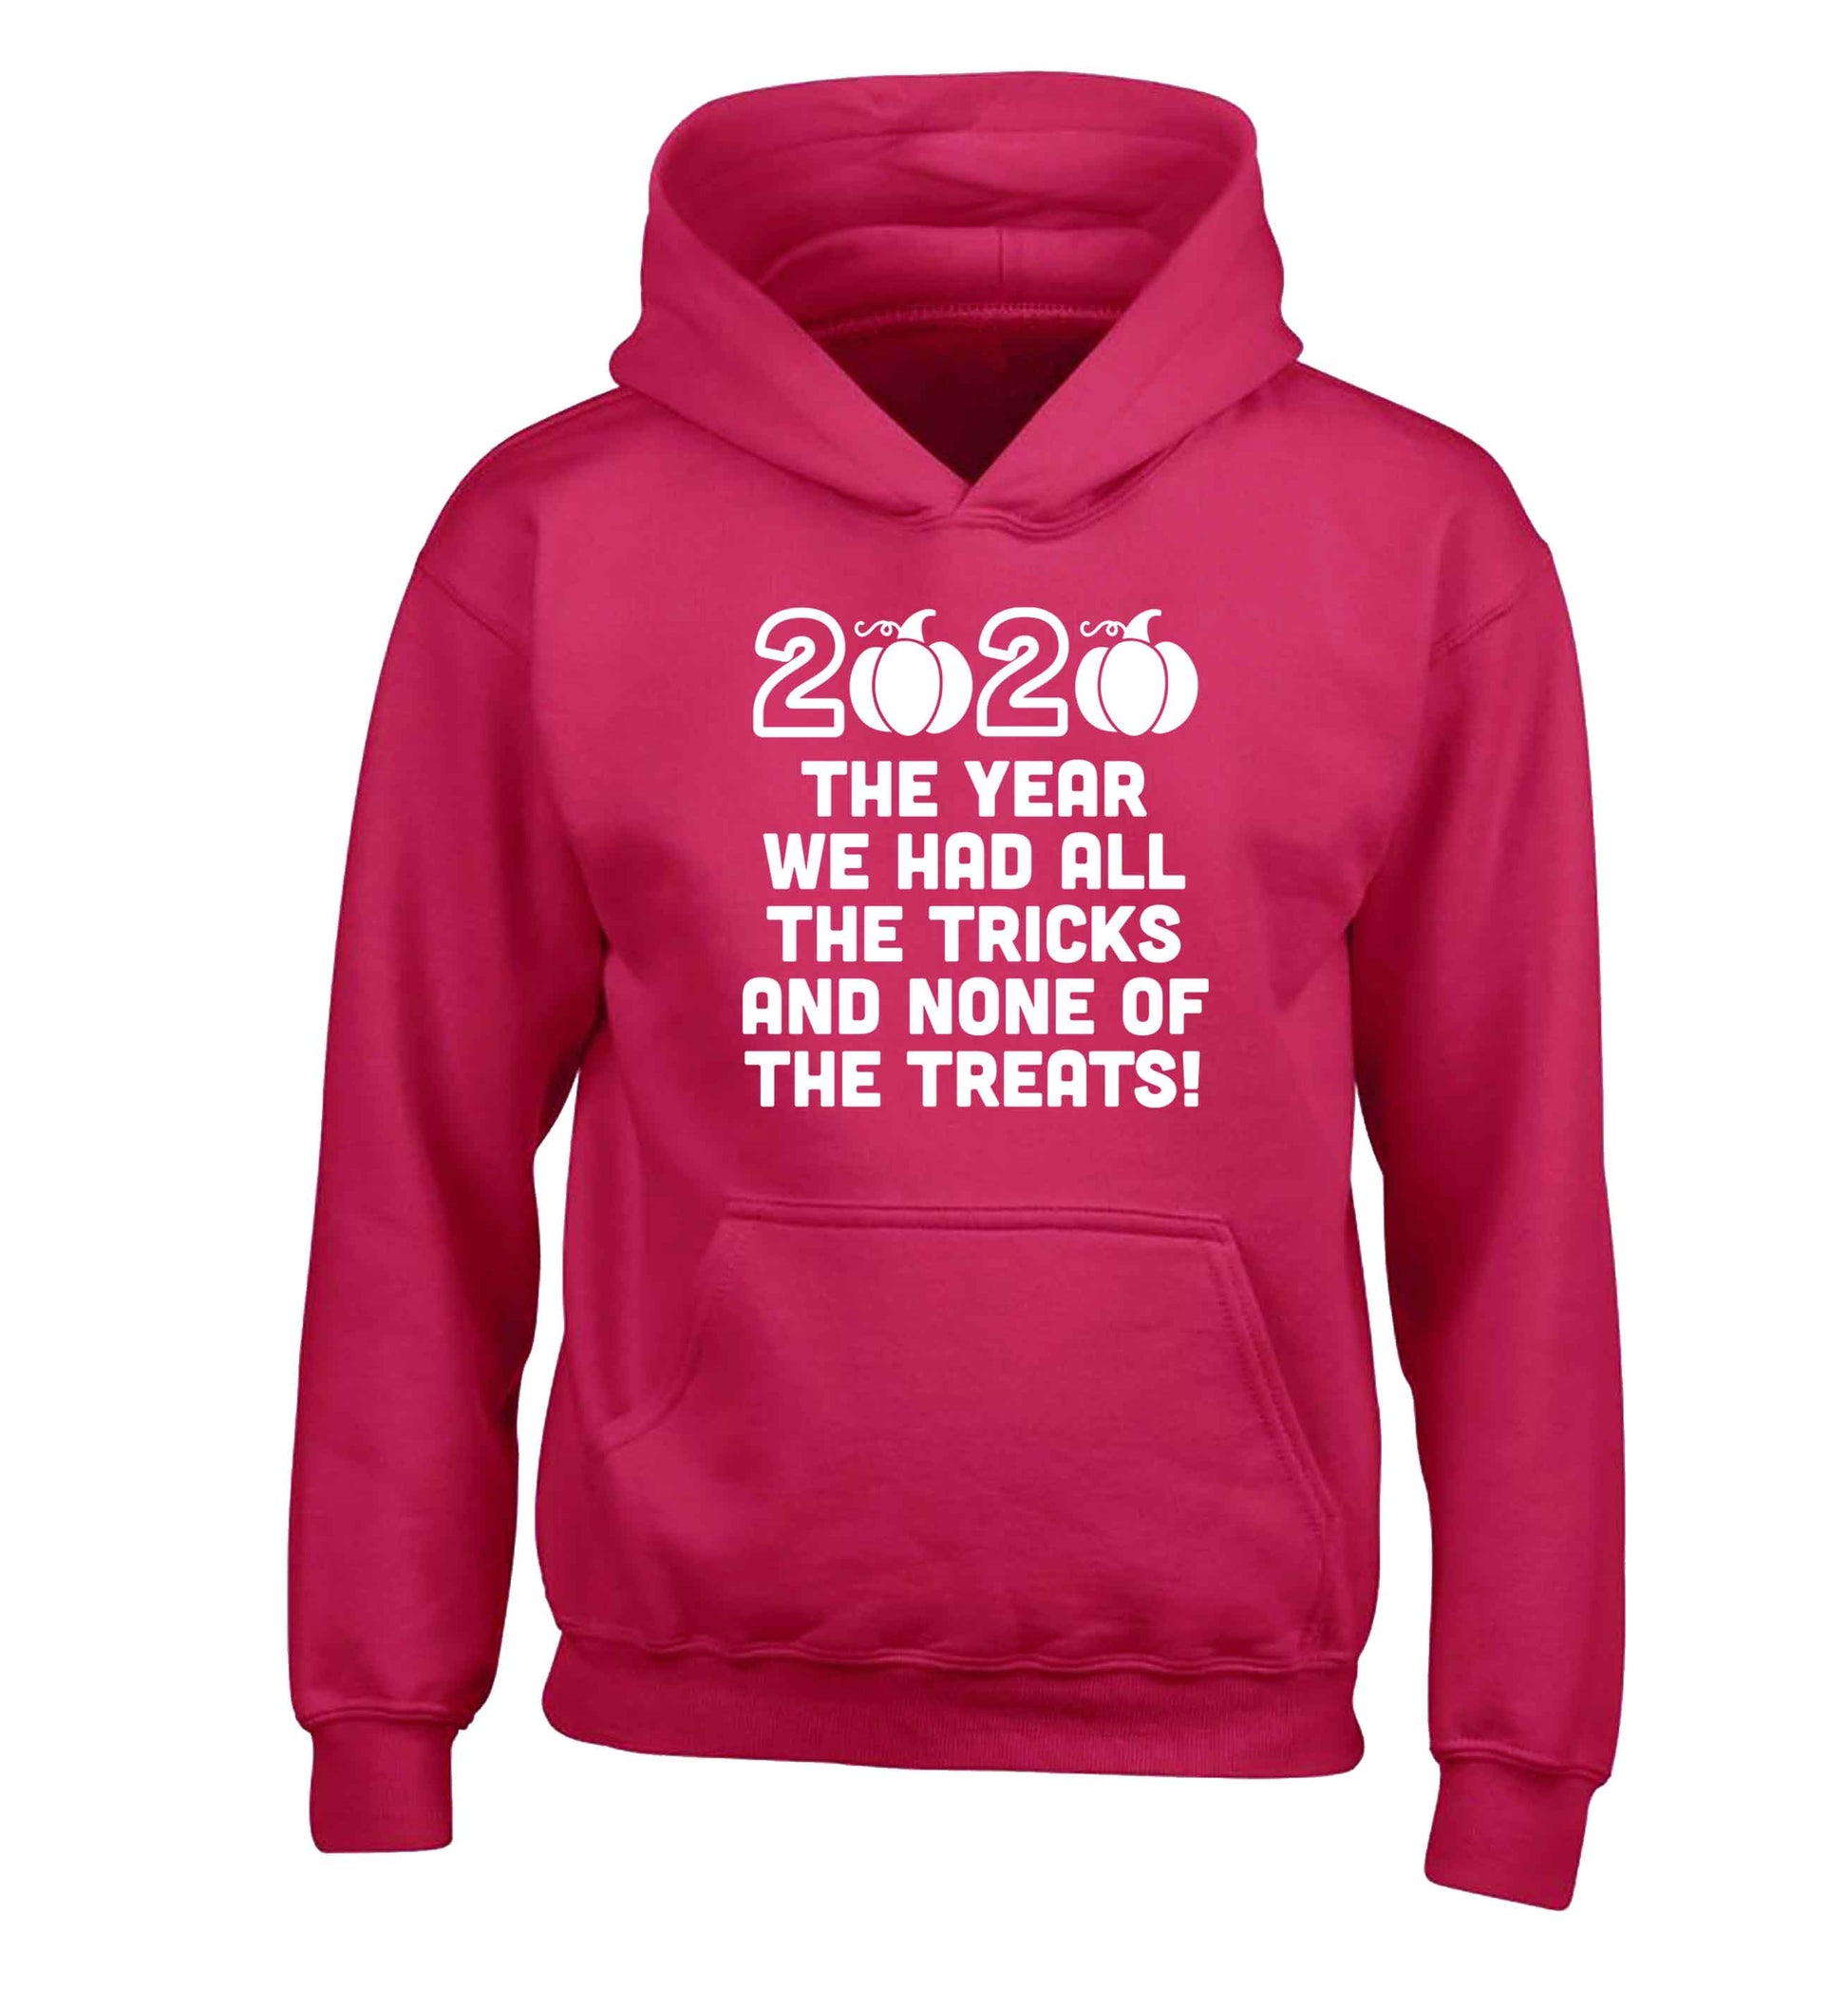 2020 The year we had all of the tricks and none of the treats children's pink hoodie 12-13 Years